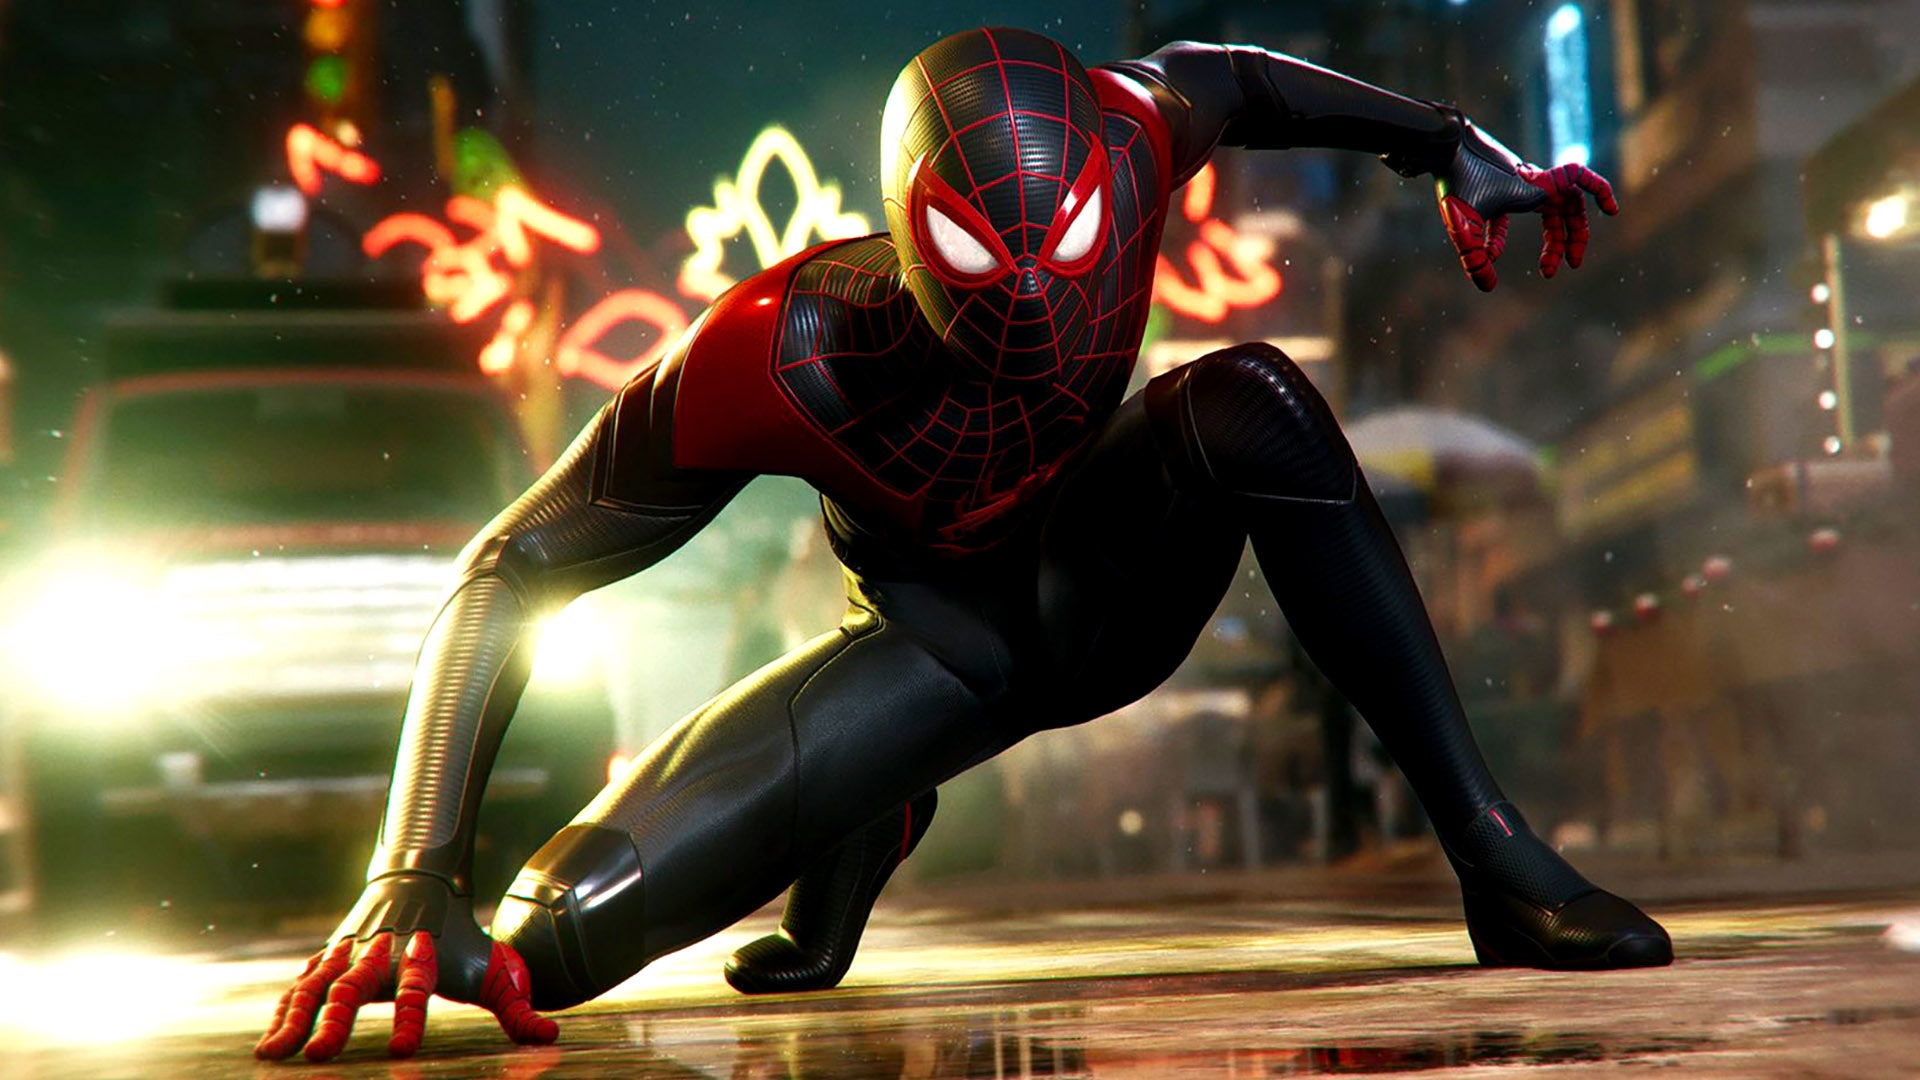 Image for Marvel's Spider-Man: Miles Morales - Digital Foundry Tech Review - Welcome To The Next Generation